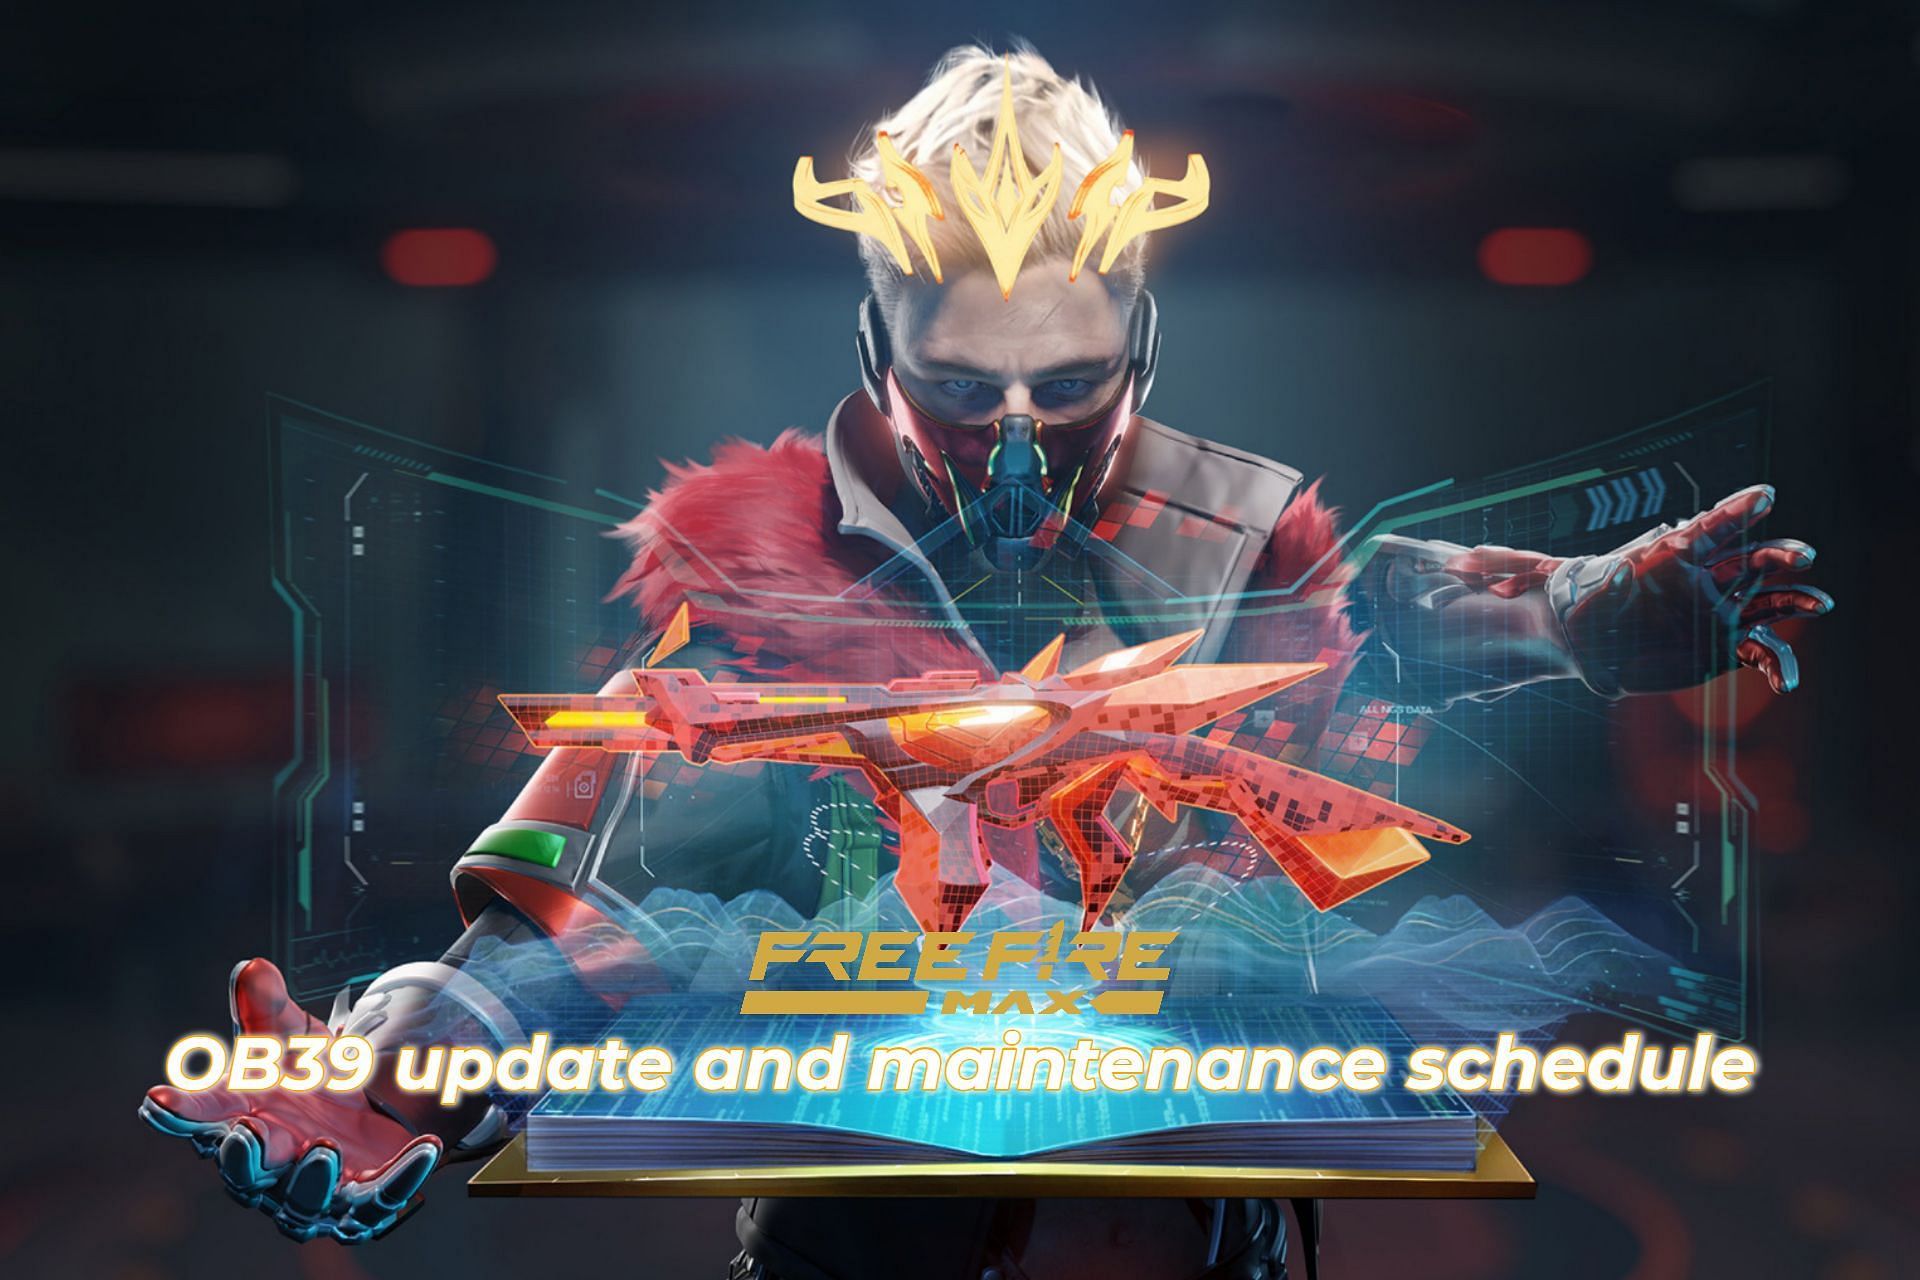 OB39 maintenance and update schedule for the India server (Image via Sportskeeda)